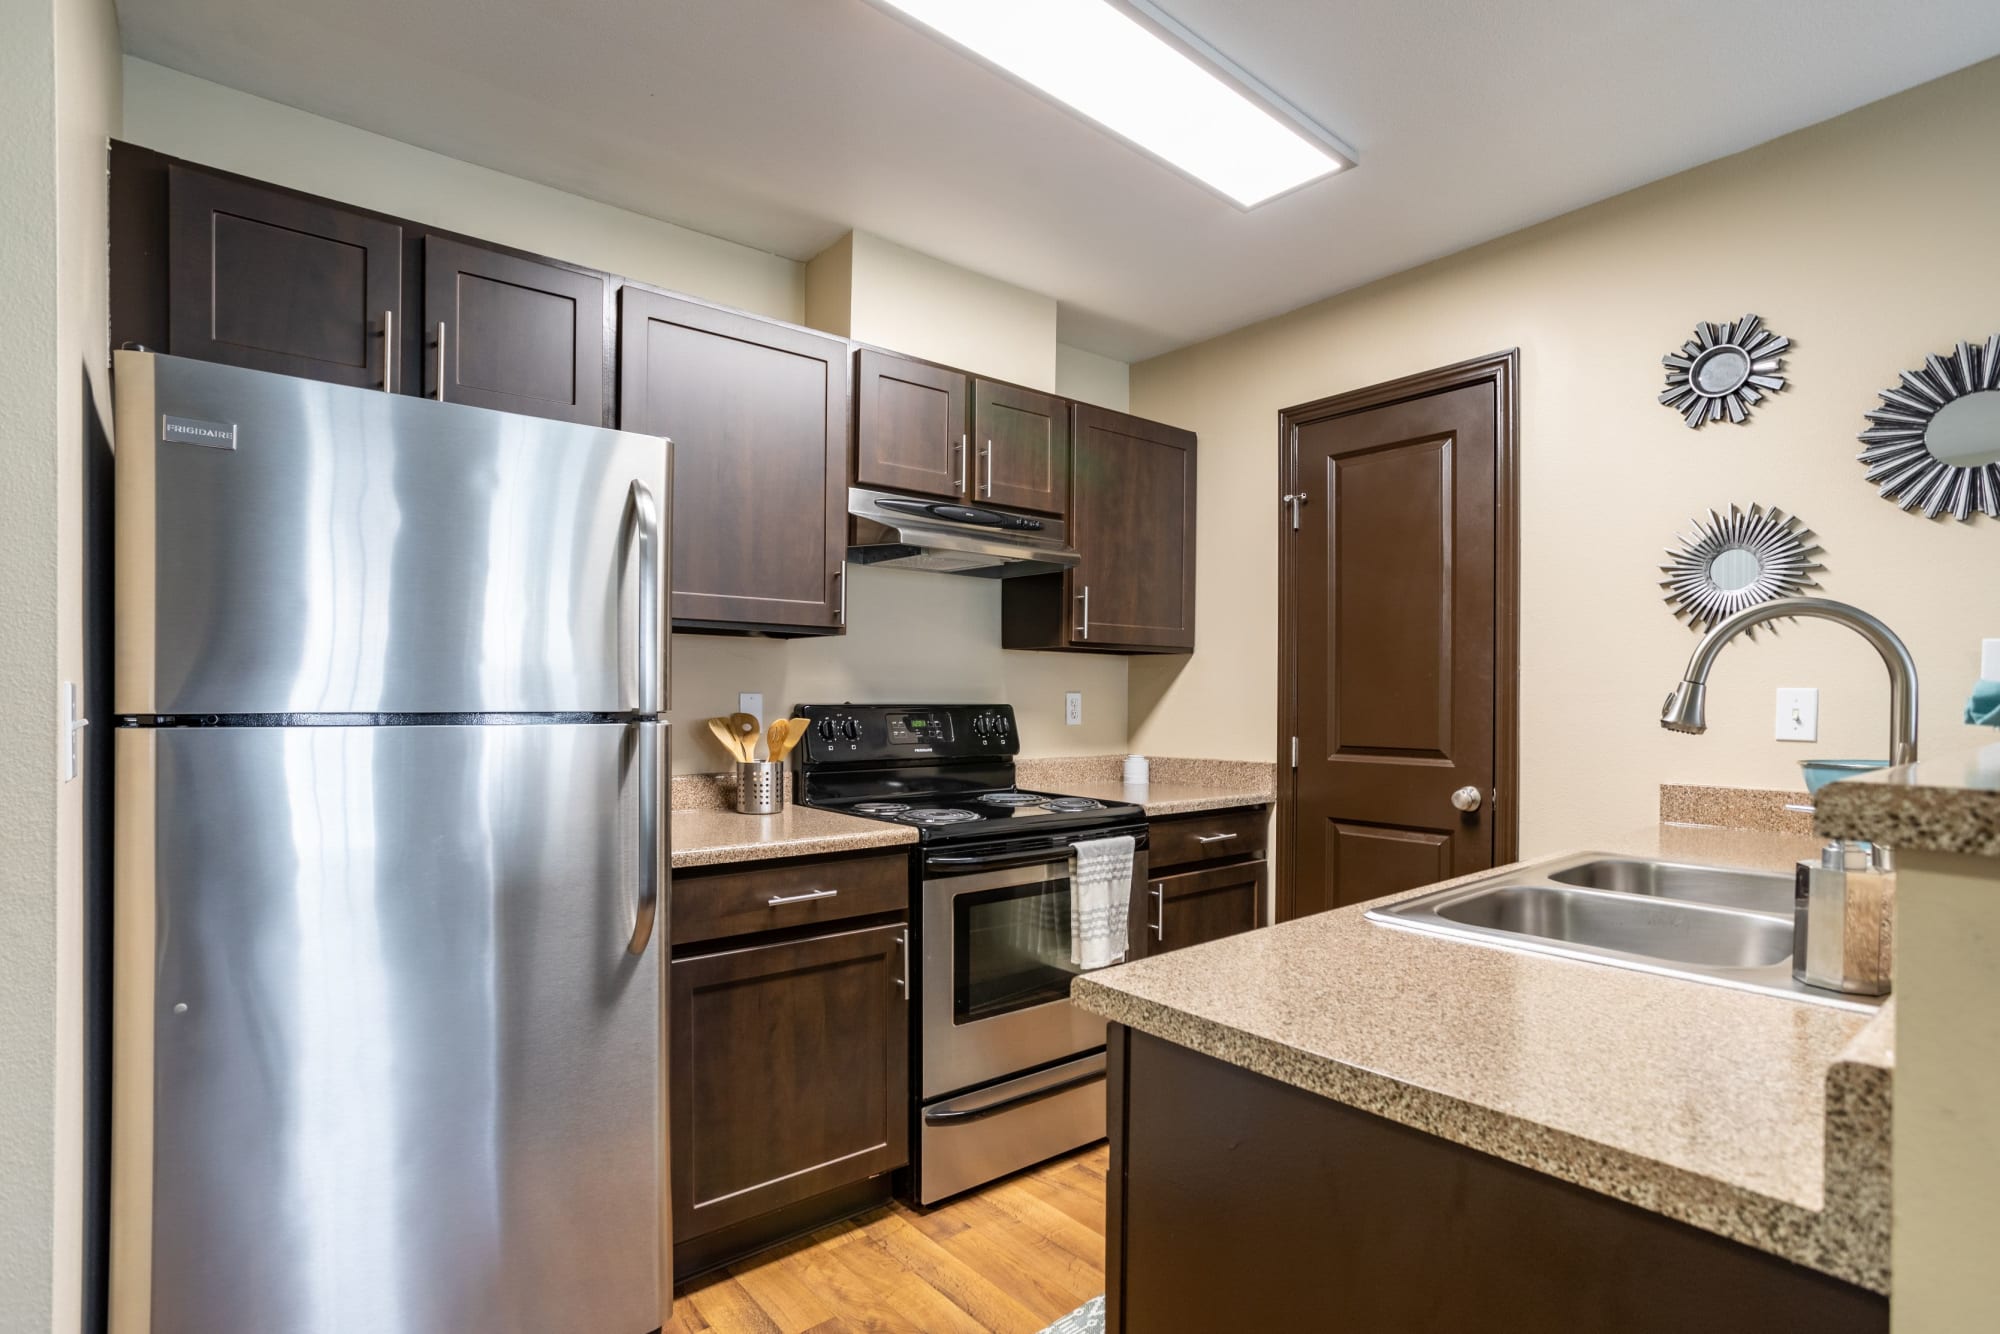 Renovated kitchen with stainless steel appliances at Pebble Cove Apartments in Renton, Washington